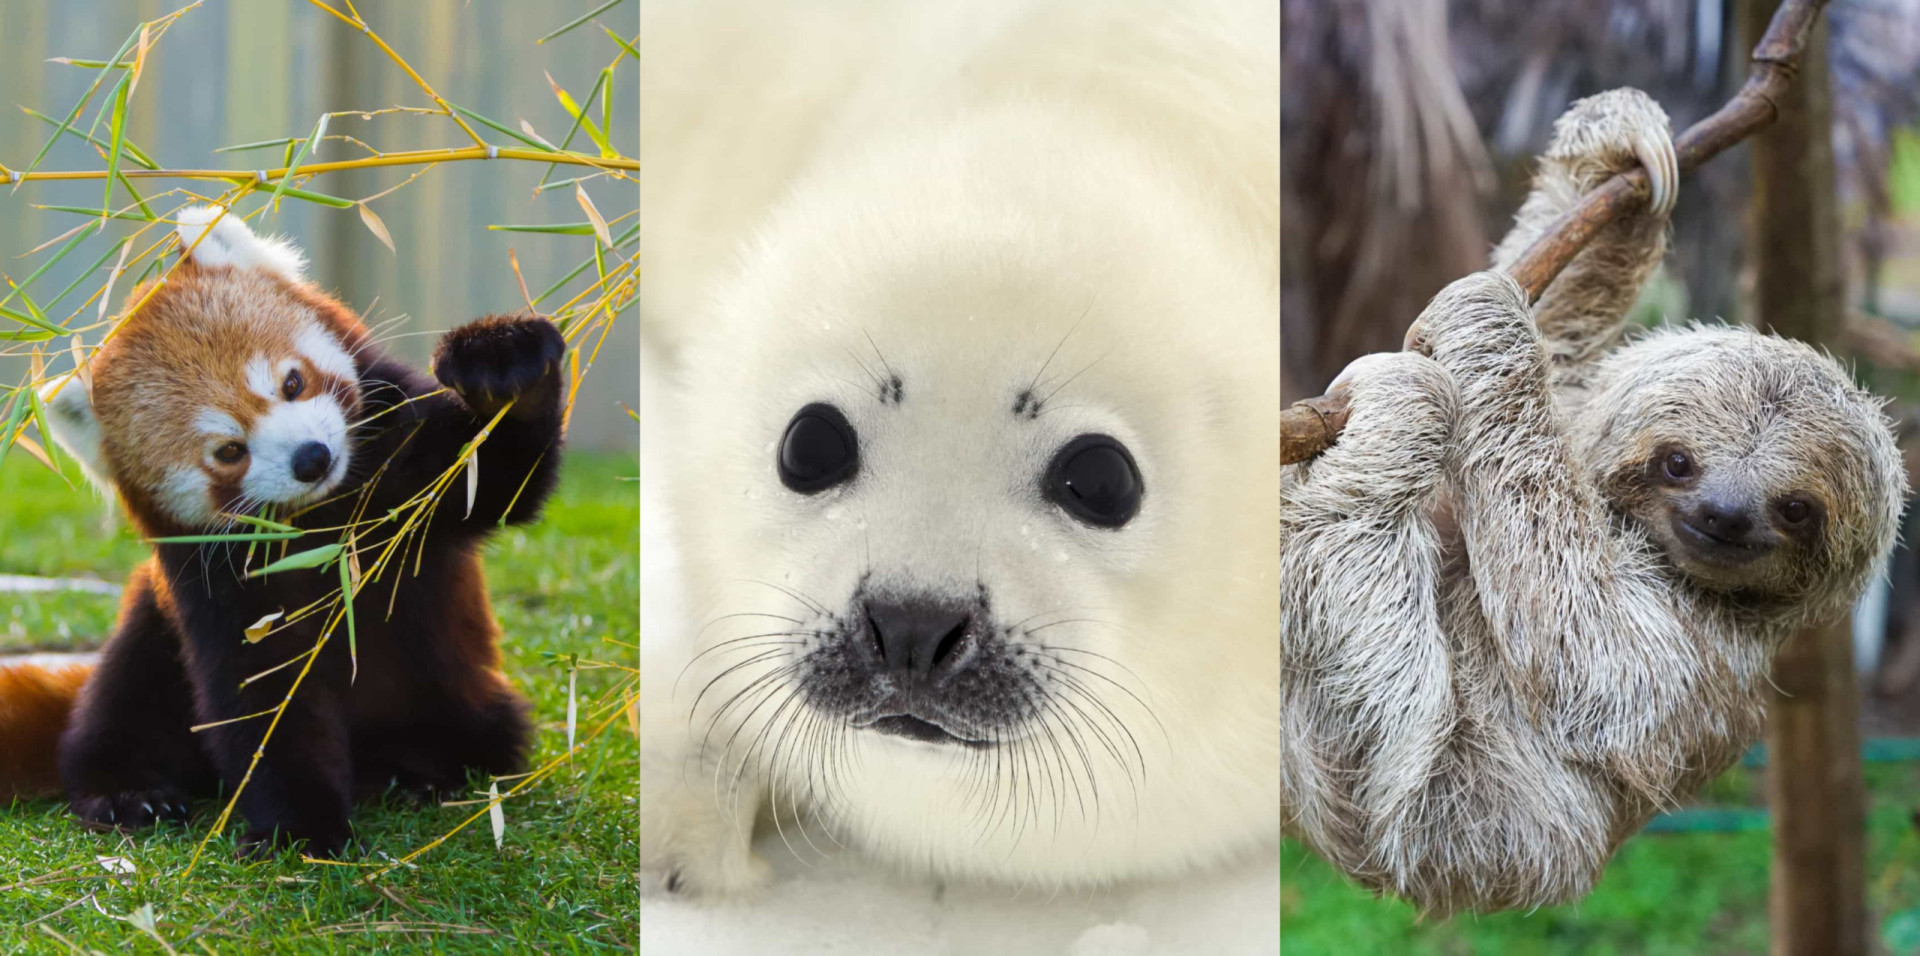 The world's most ridiculously adorable wild animals